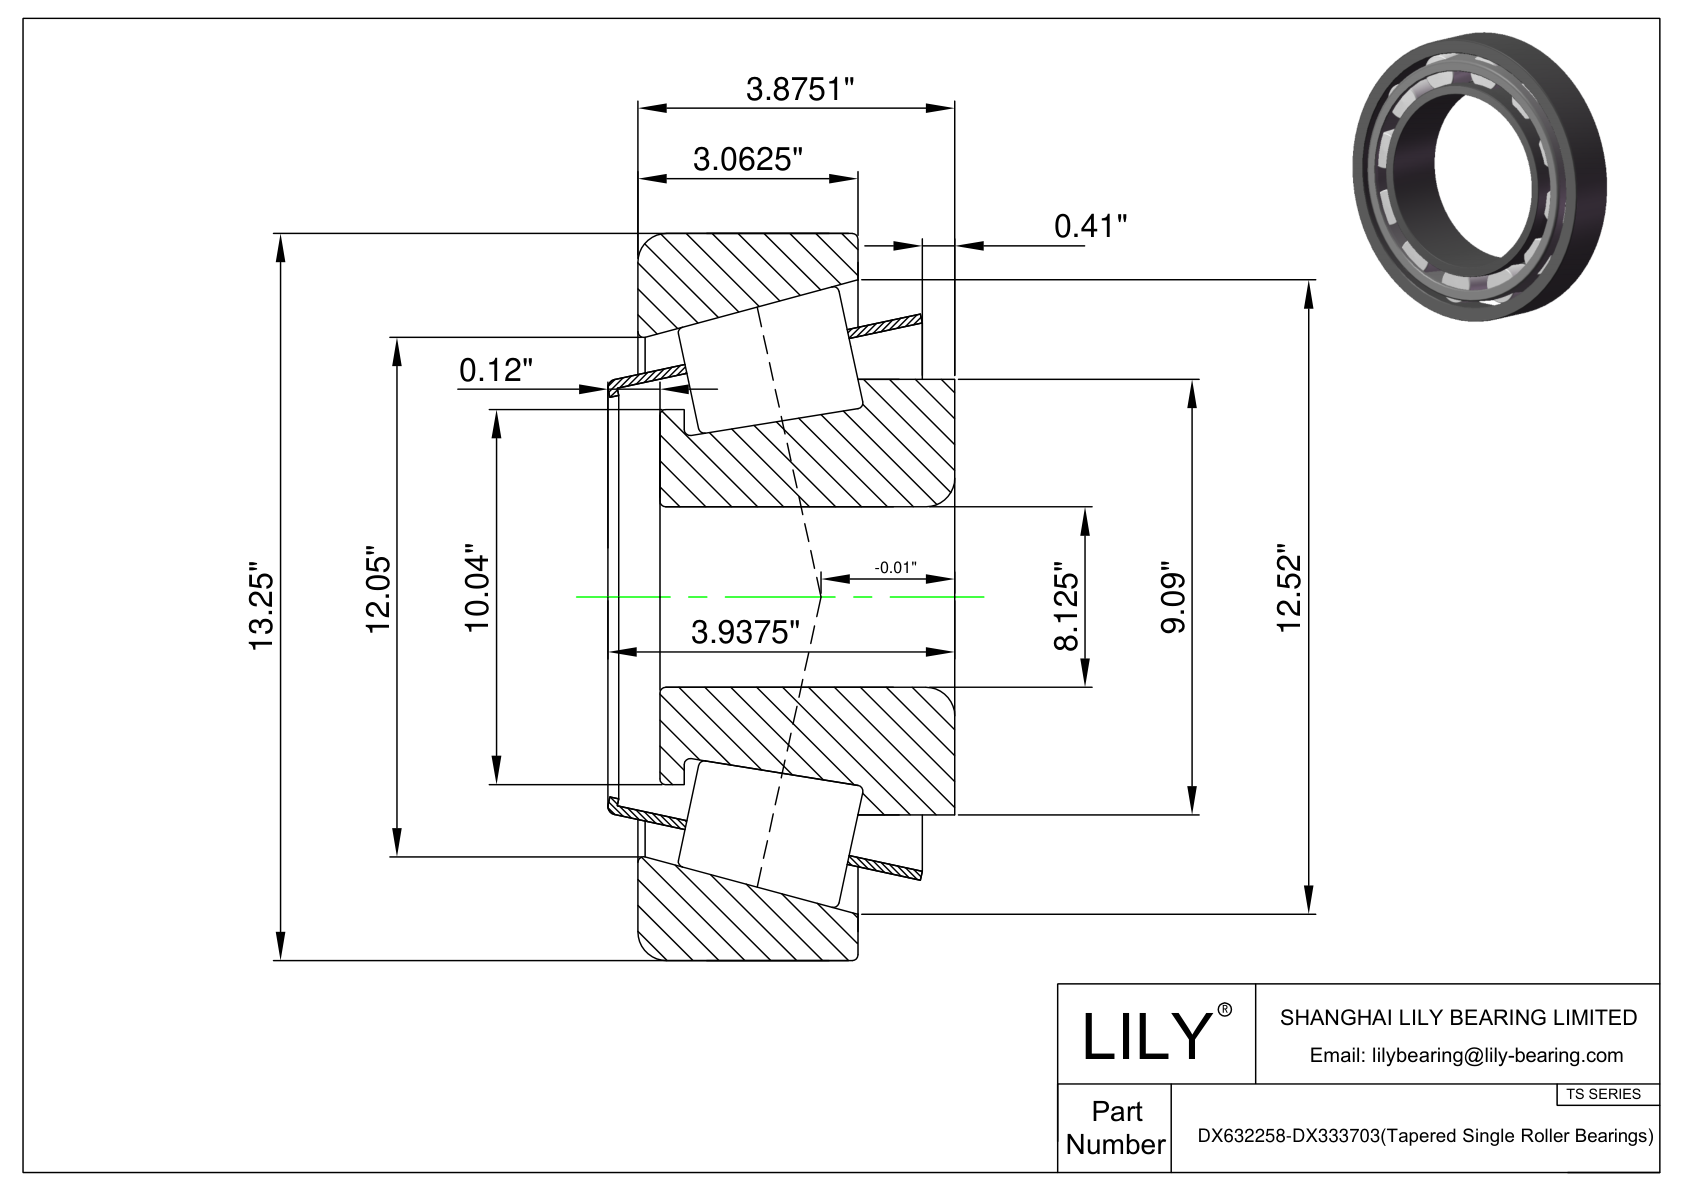 DX632258-DX333703 TS (Tapered Single Roller Bearings) (Imperial) cad drawing